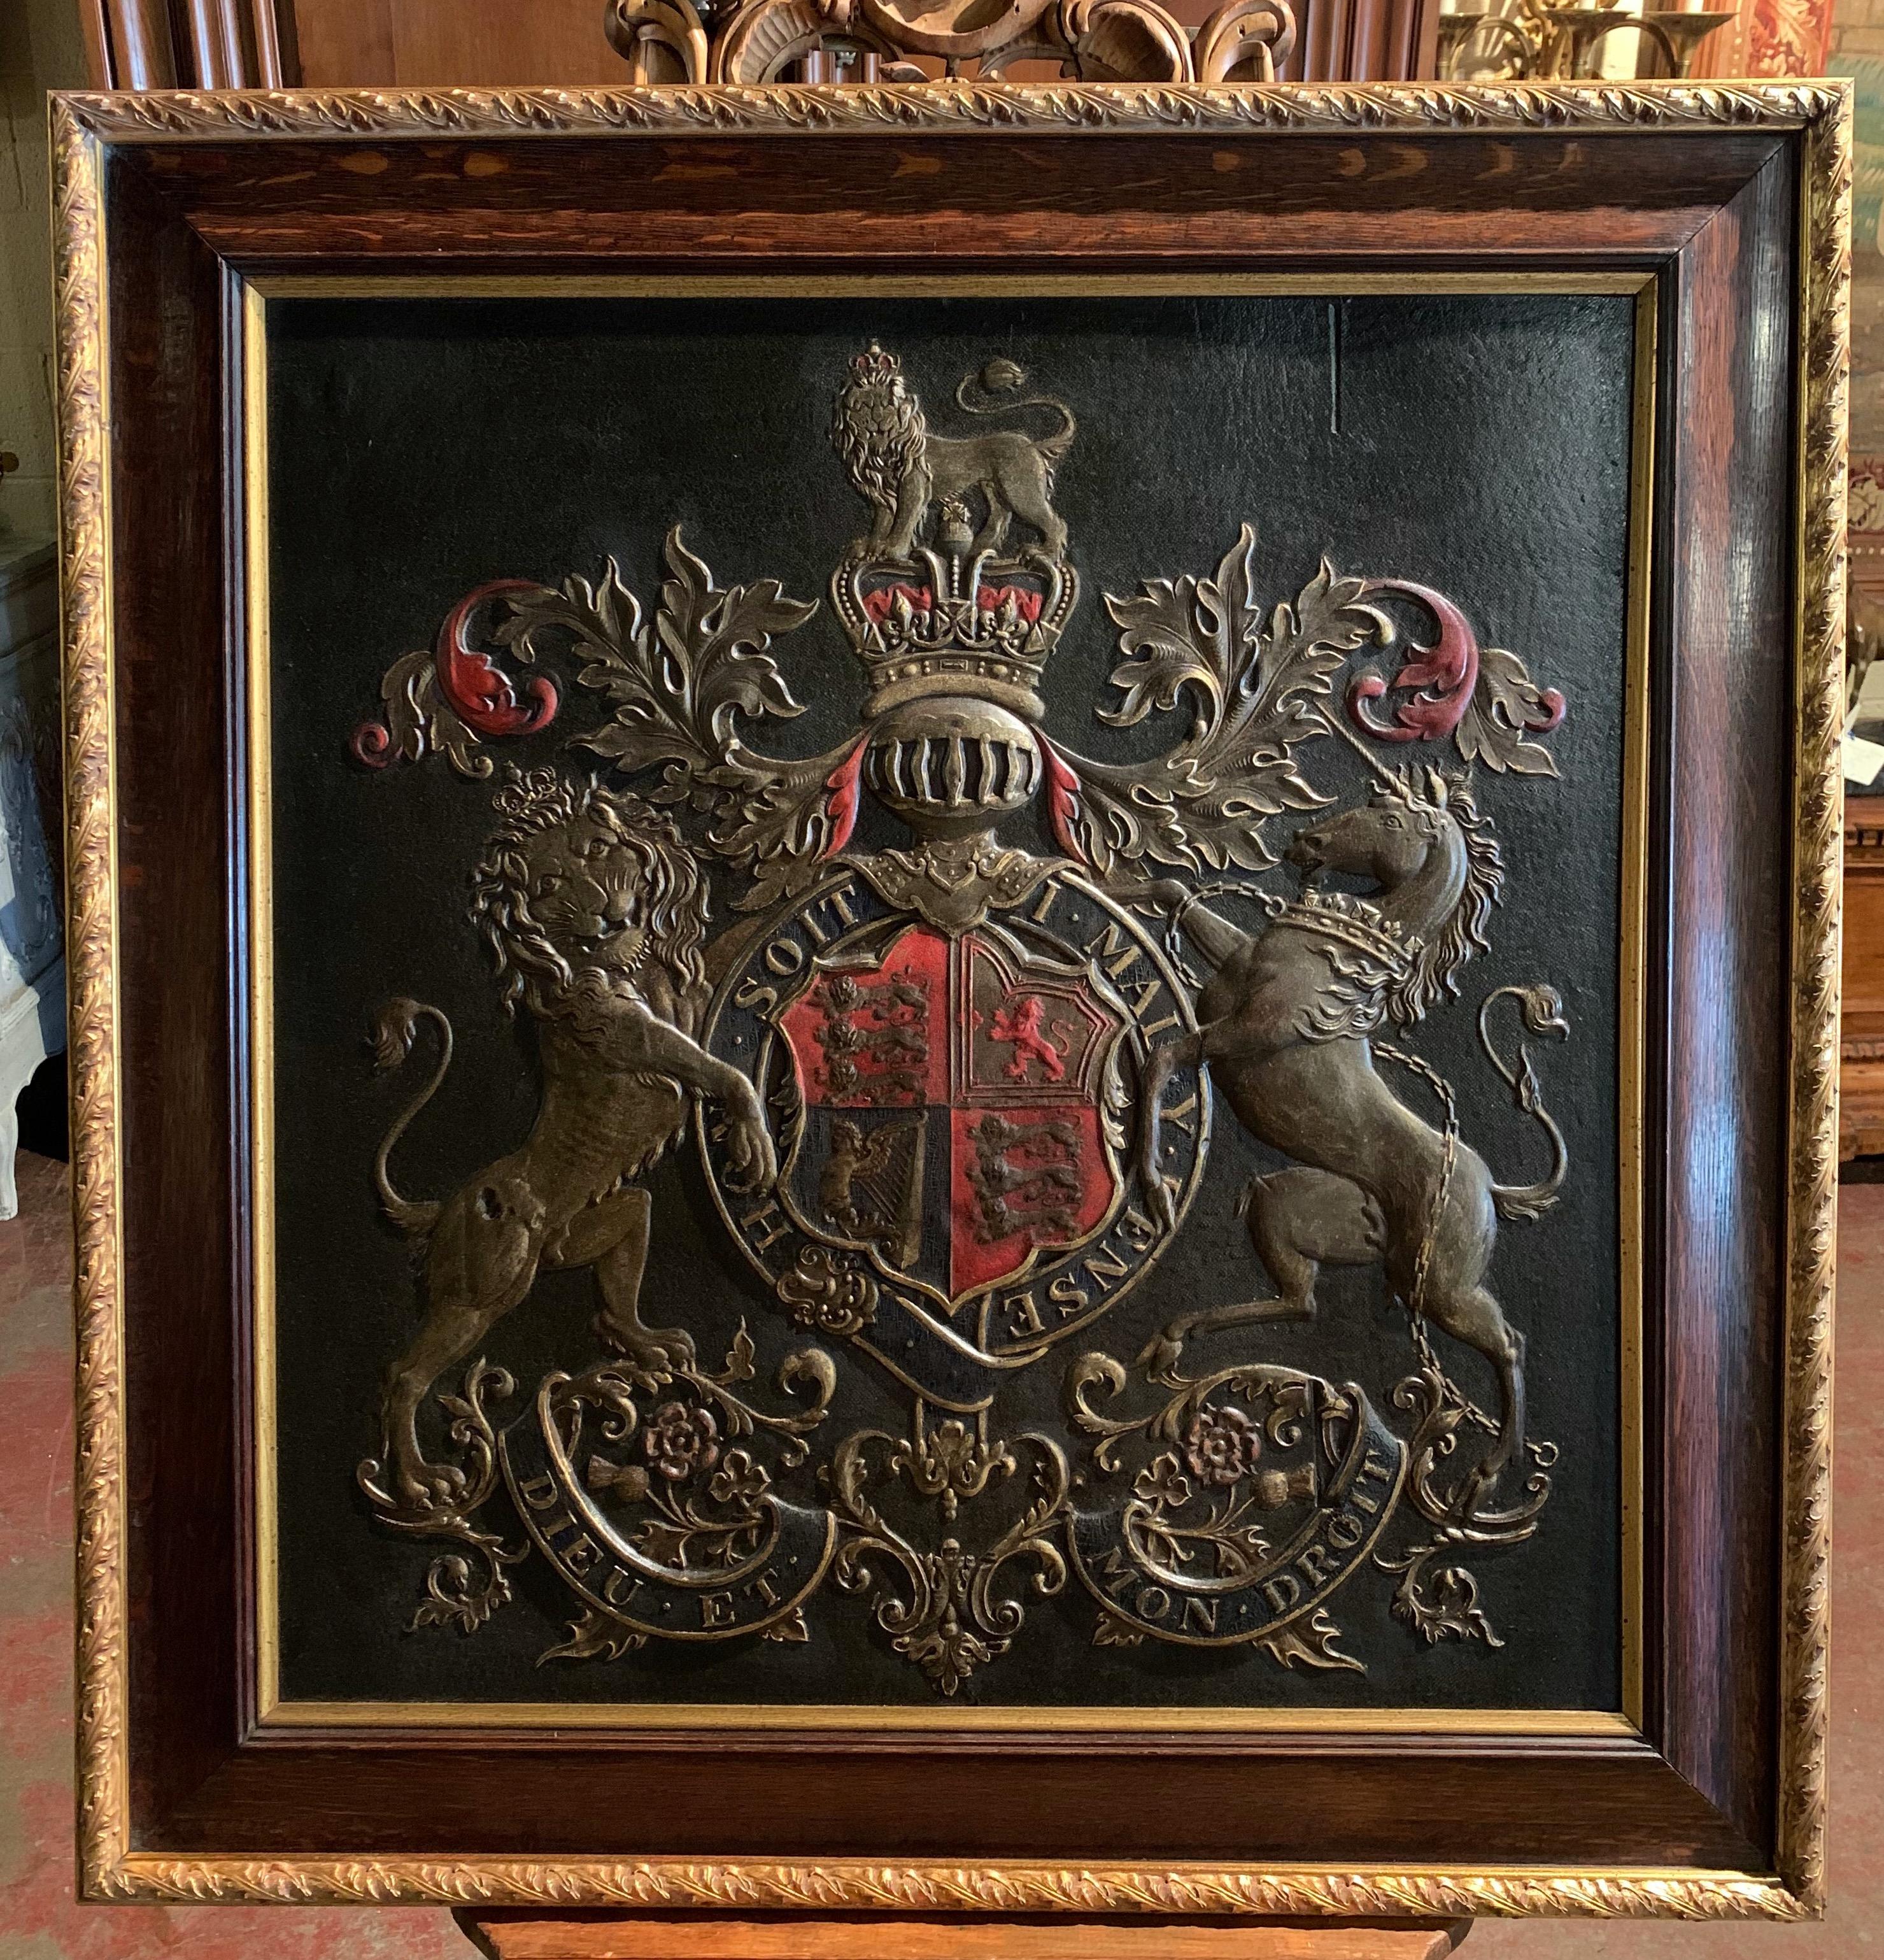 English 19th Century Framed Embossed Leather Royal Coat of Arms of The United Kingdom